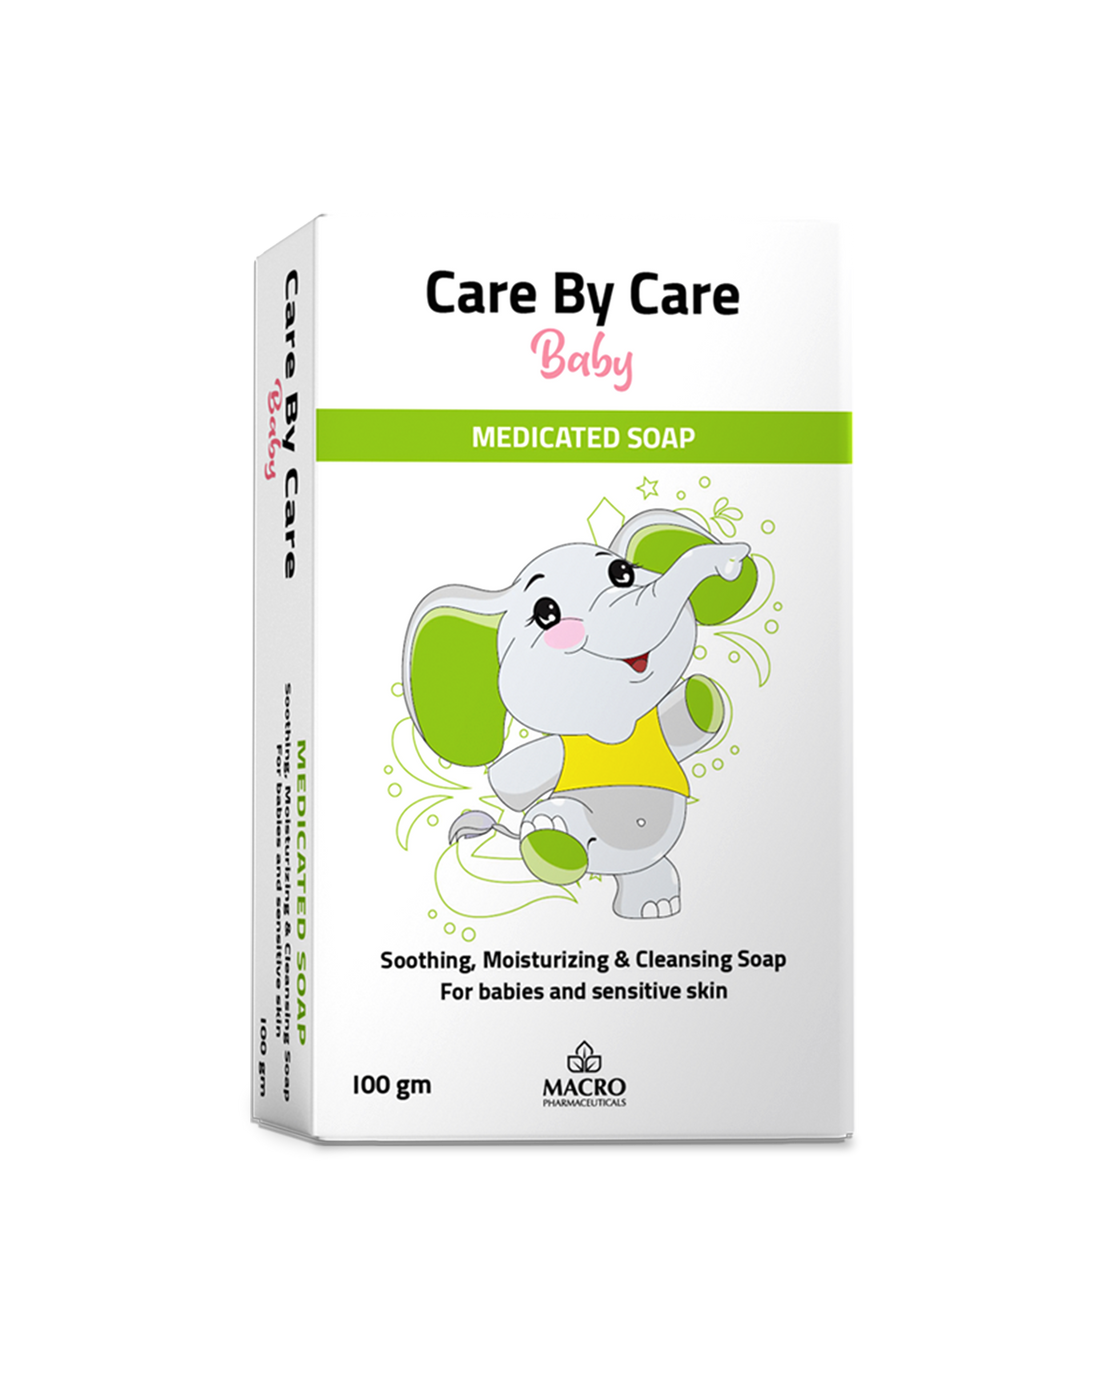 Care by Care Baby soap